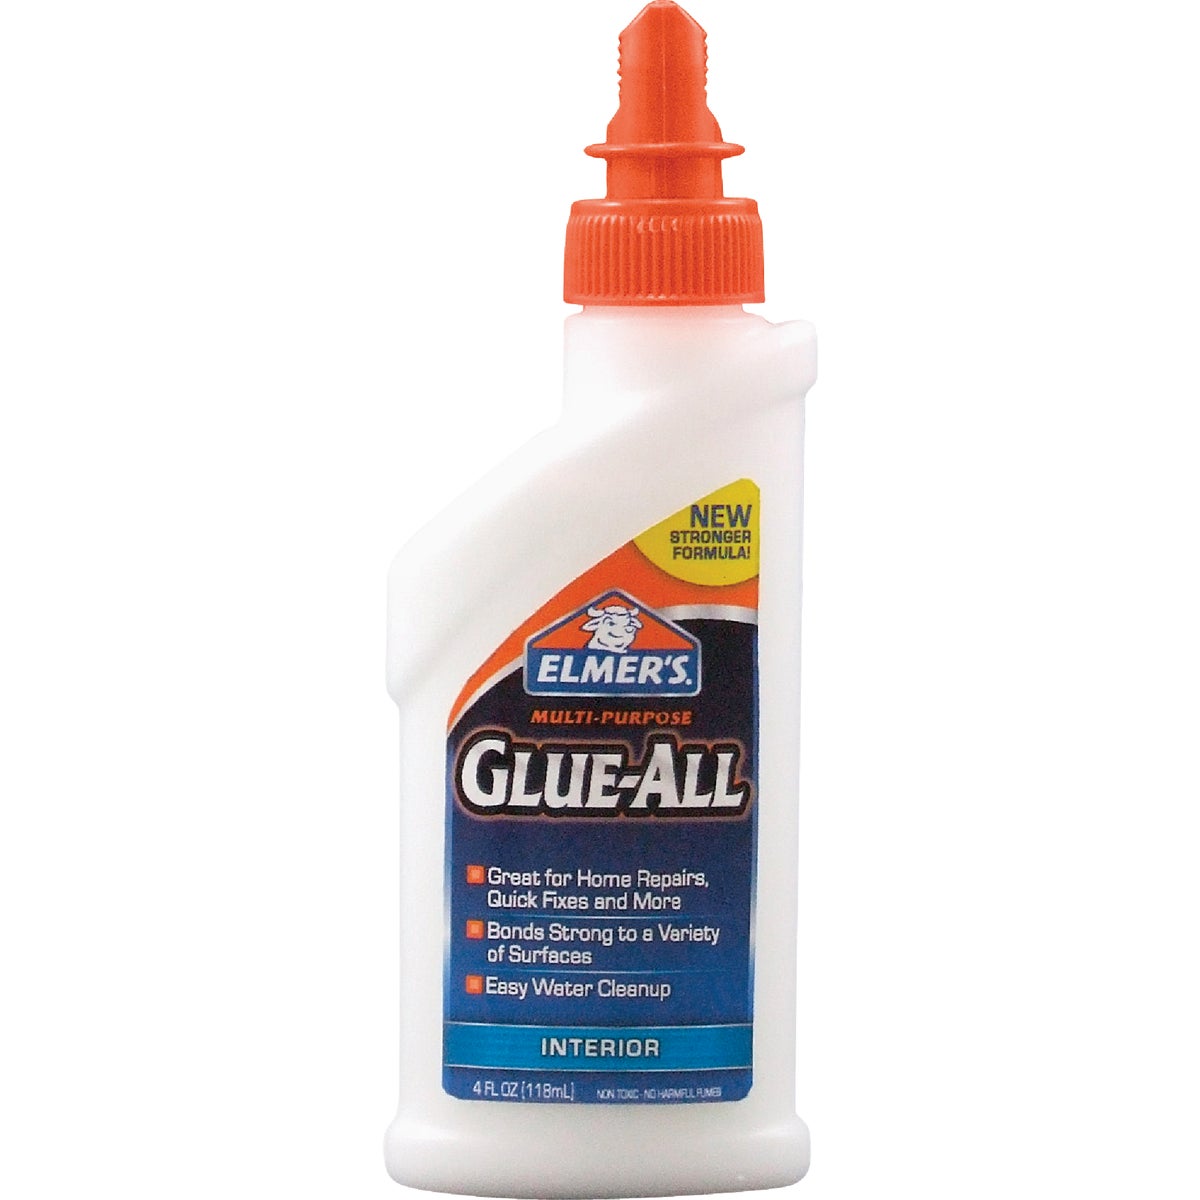 Item 333963, Multi-purpose glue bonds strong to a variety of surfaces.